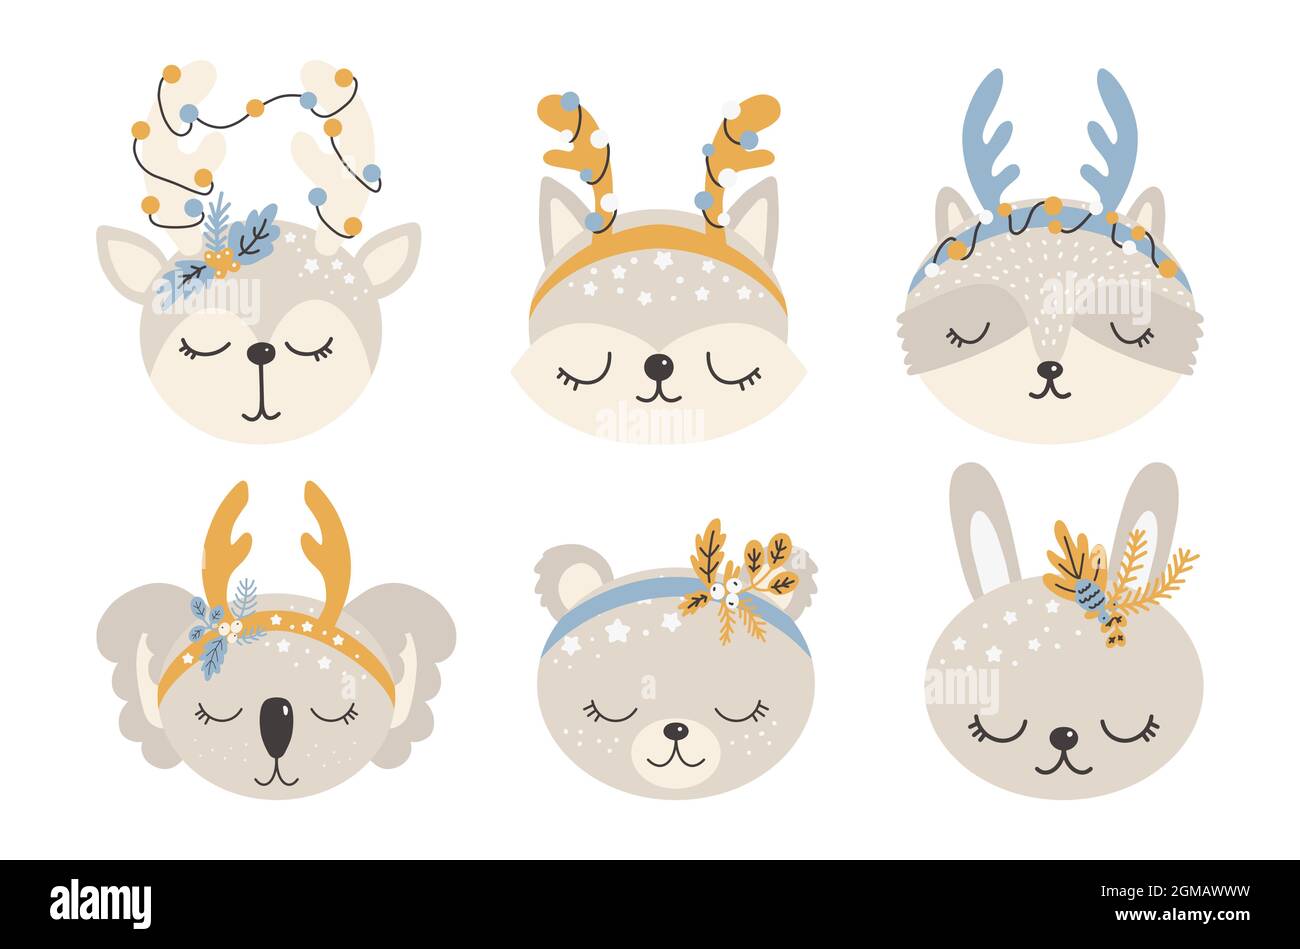 Collection of Christmas cute animals, merry Christmas illustrations of deer, fox, raccoon, hare, cat and koala with winter accessories. Scandinavian s Stock Vector